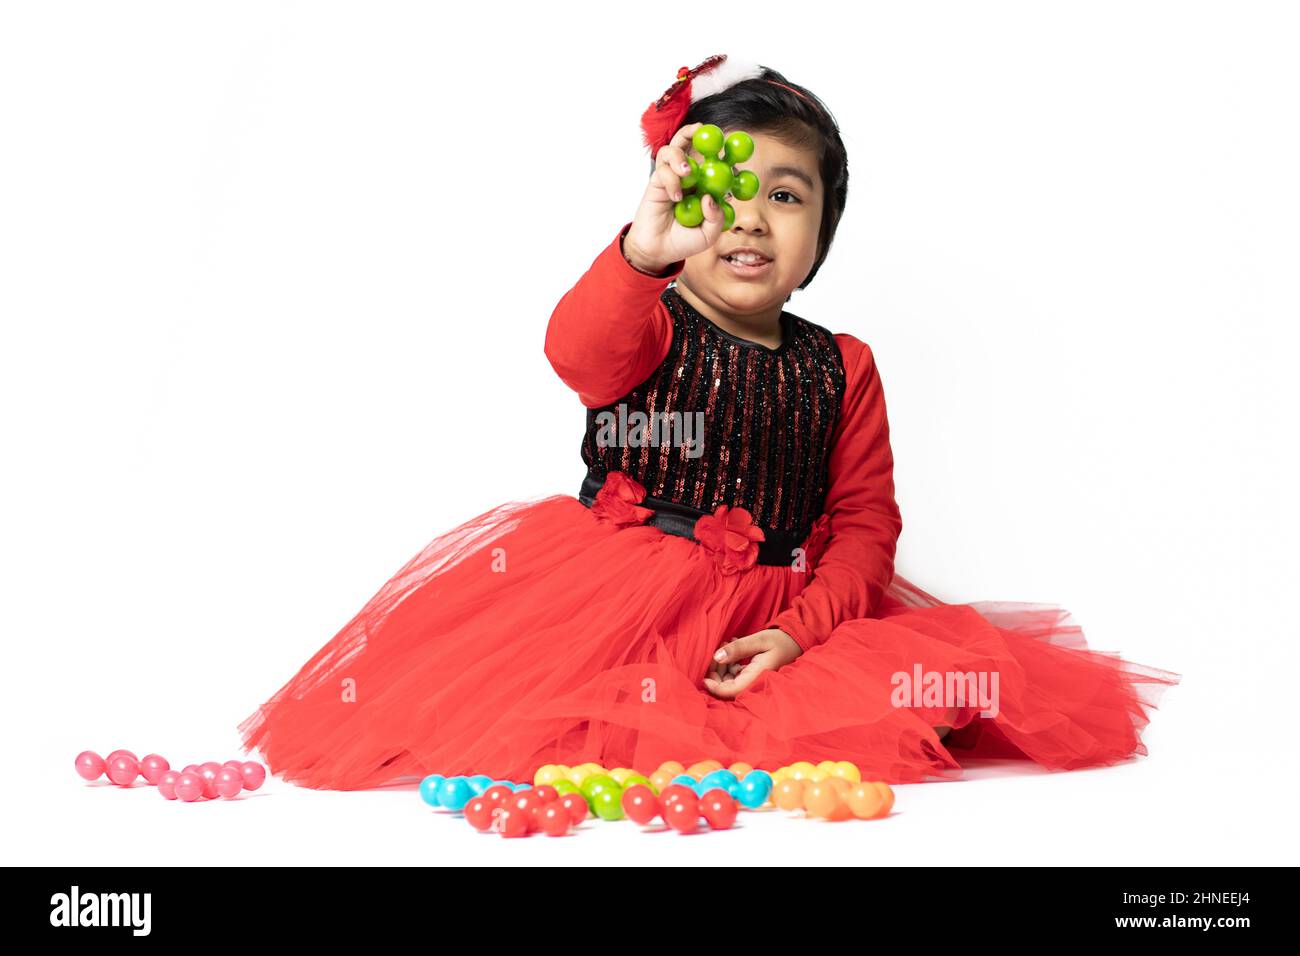 Happy Indian Pretty Girl Playing With Colorful Toys On White Background. Fun, Activity, Educational, Kindergarten, Birthday, Learning, Home Activity, Stock Photo